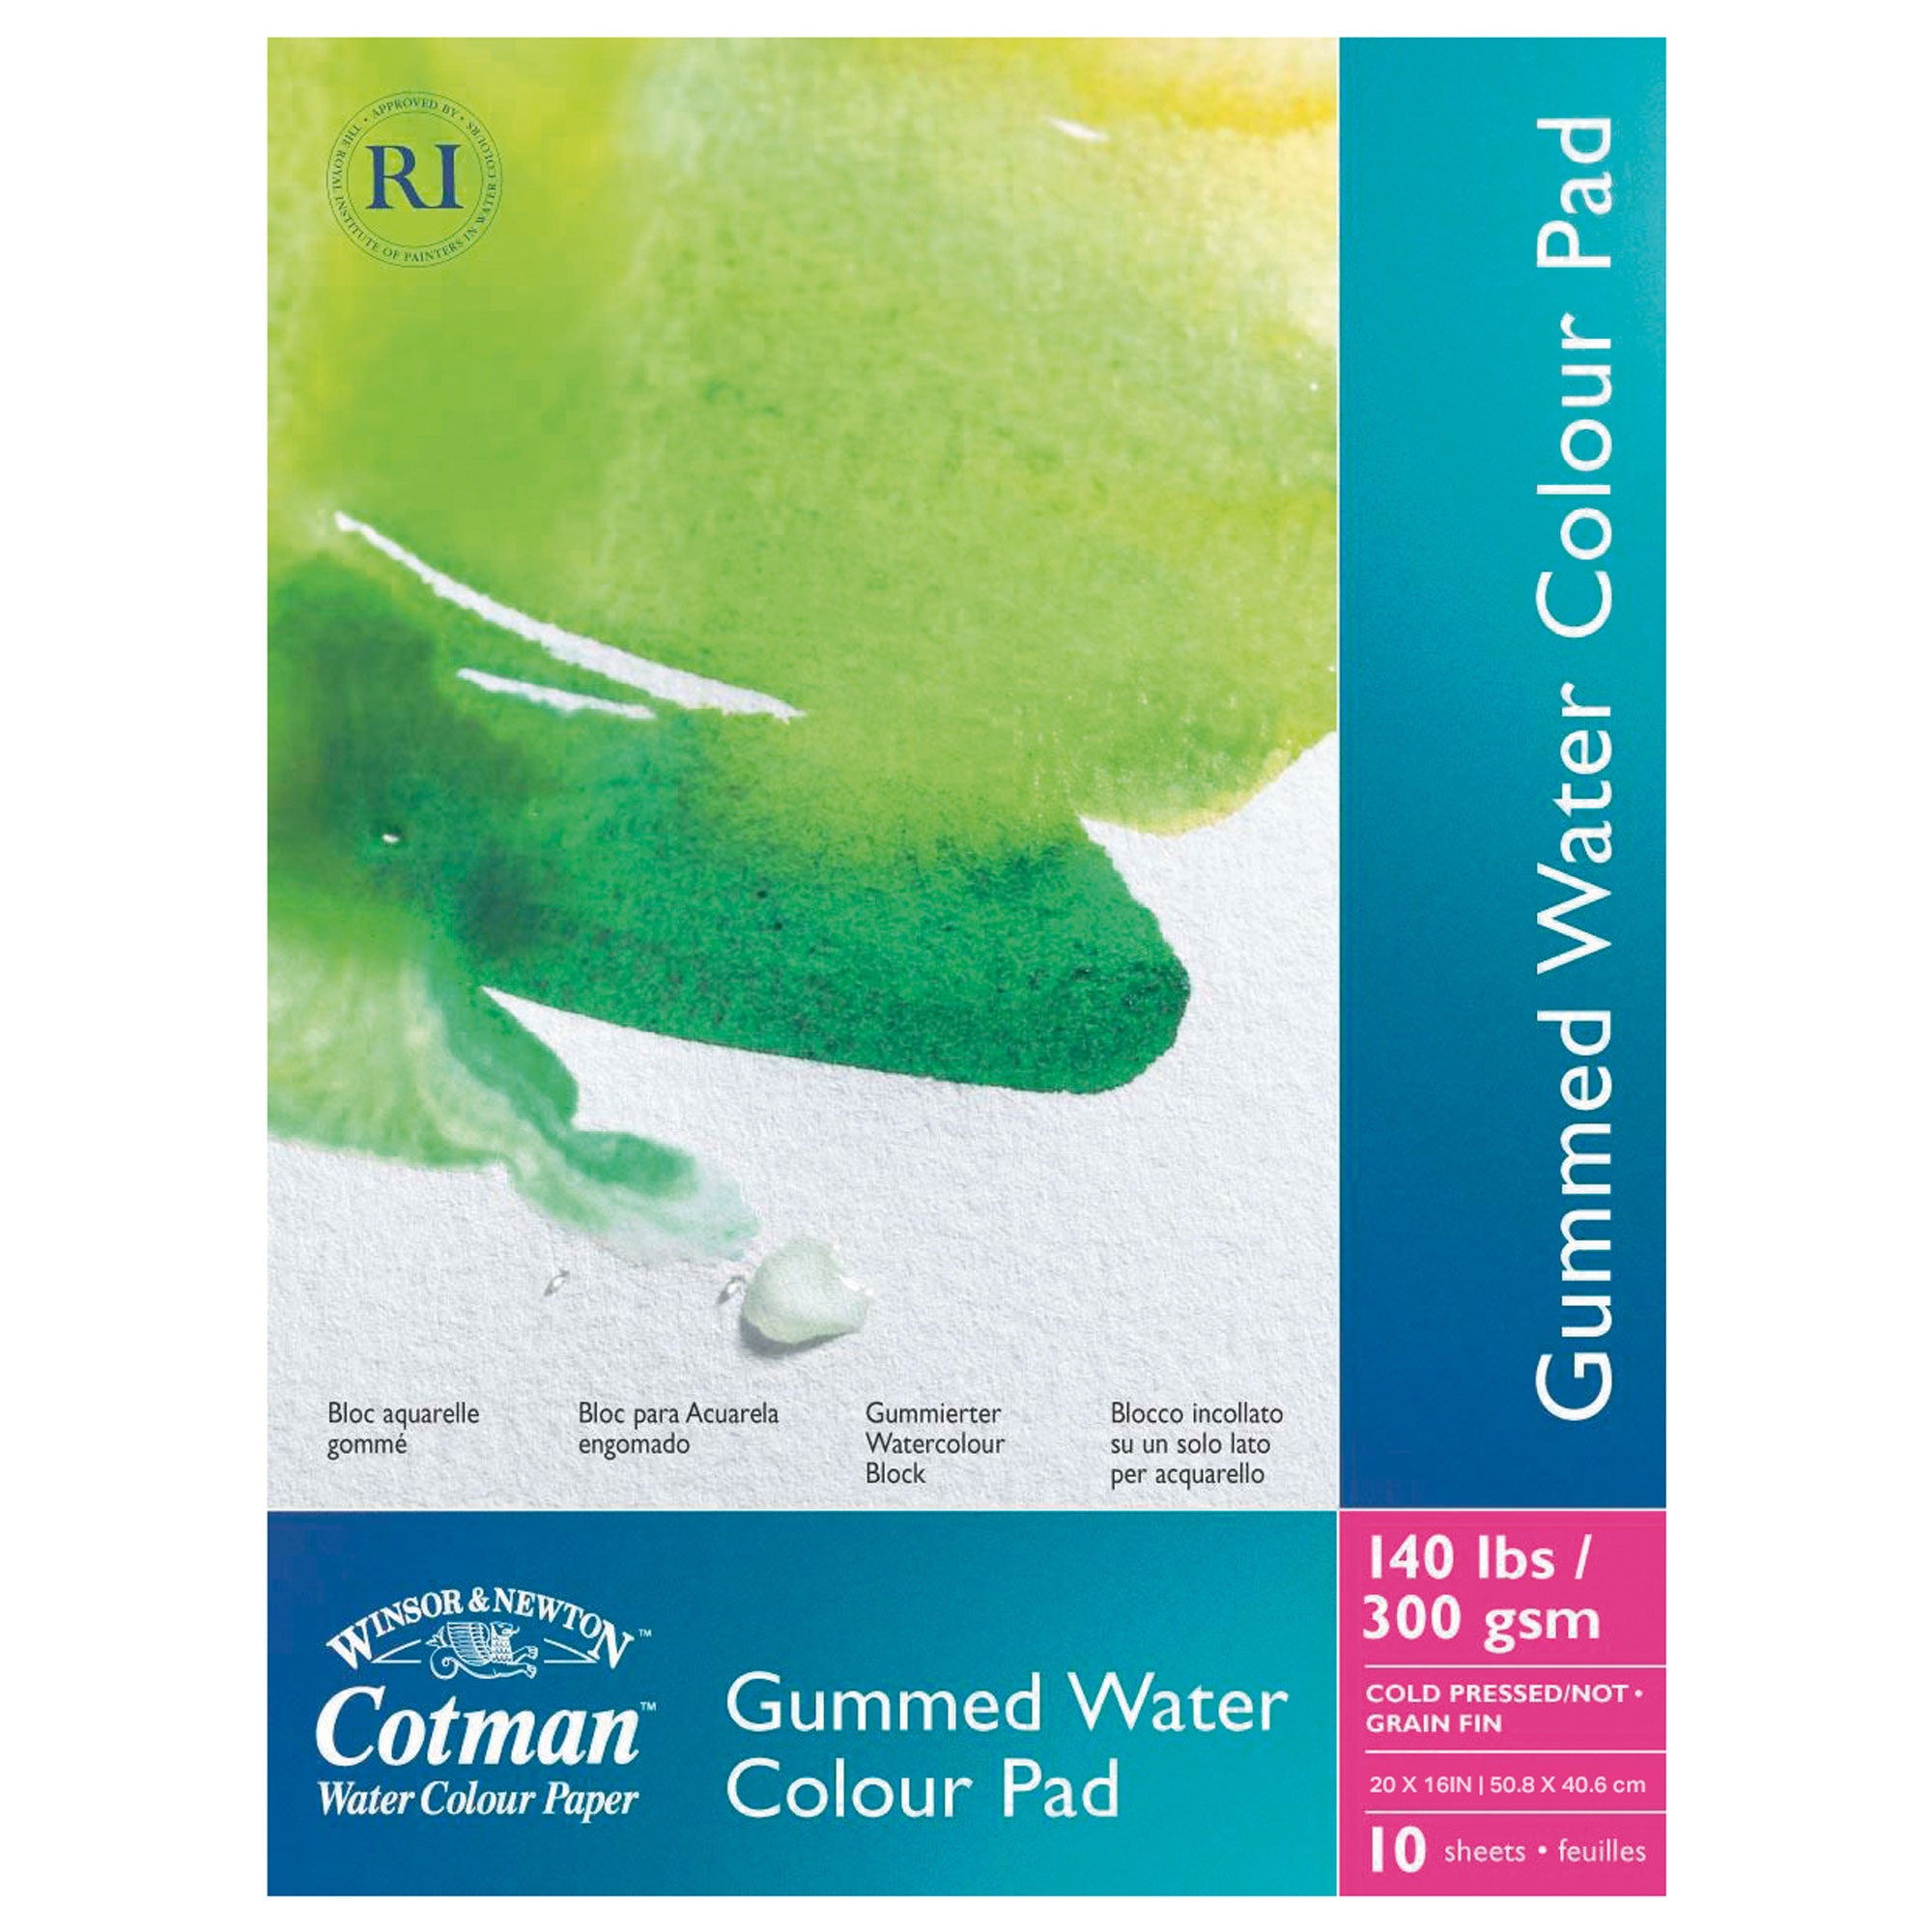 Winsor & Newton Professional Watercolor Paper Journal, Cold Pressed 140lb, 5x7